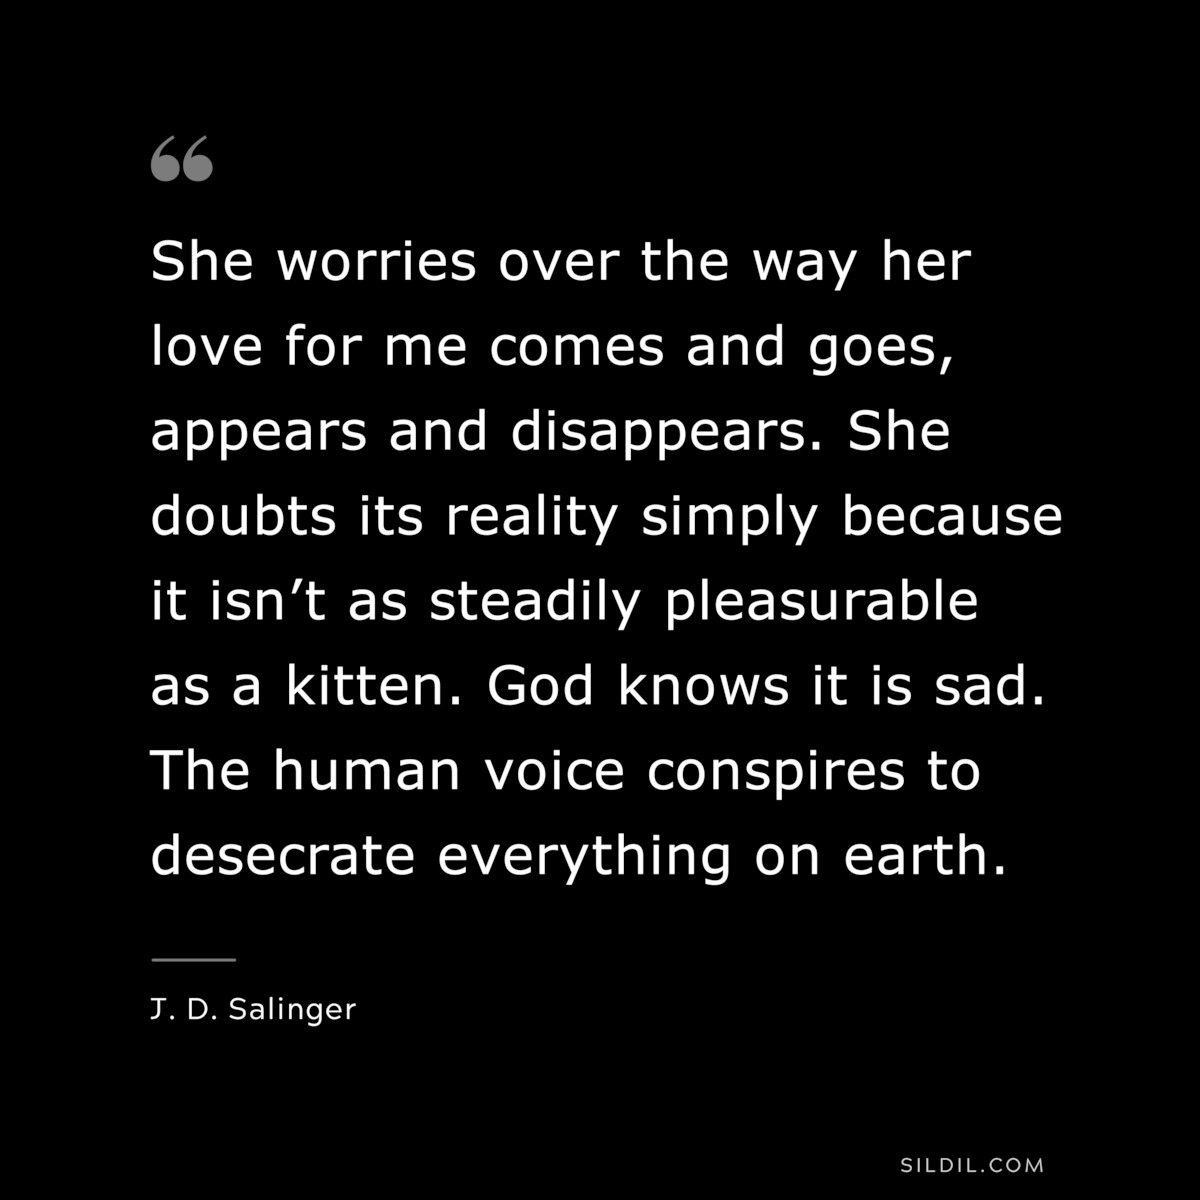 She worries over the way her love for me comes and goes, appears and disappears. She doubts its reality simply because it isn’t as steadily pleasurable as a kitten. God knows it is sad. The human voice conspires to desecrate everything on earth. — J. D. Salinger